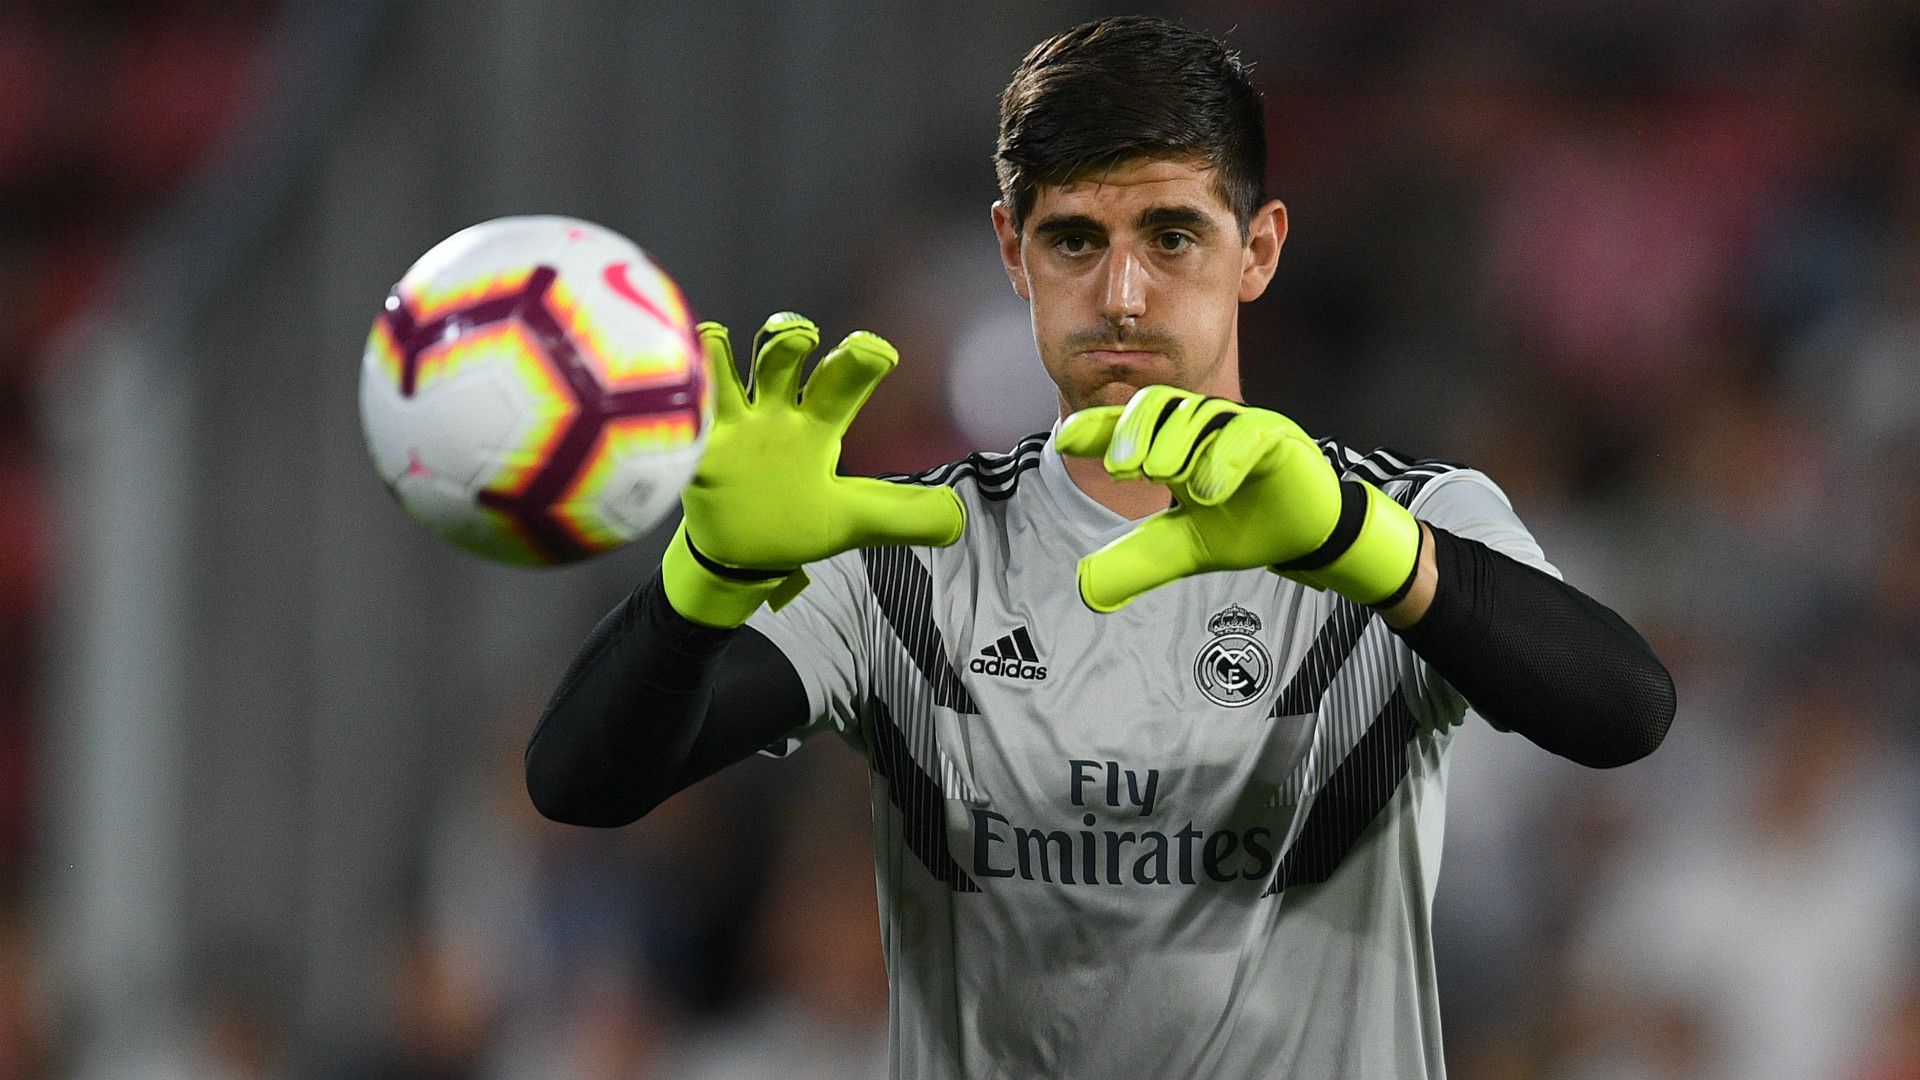 Courtois to make Real Madrid debut against Leganes